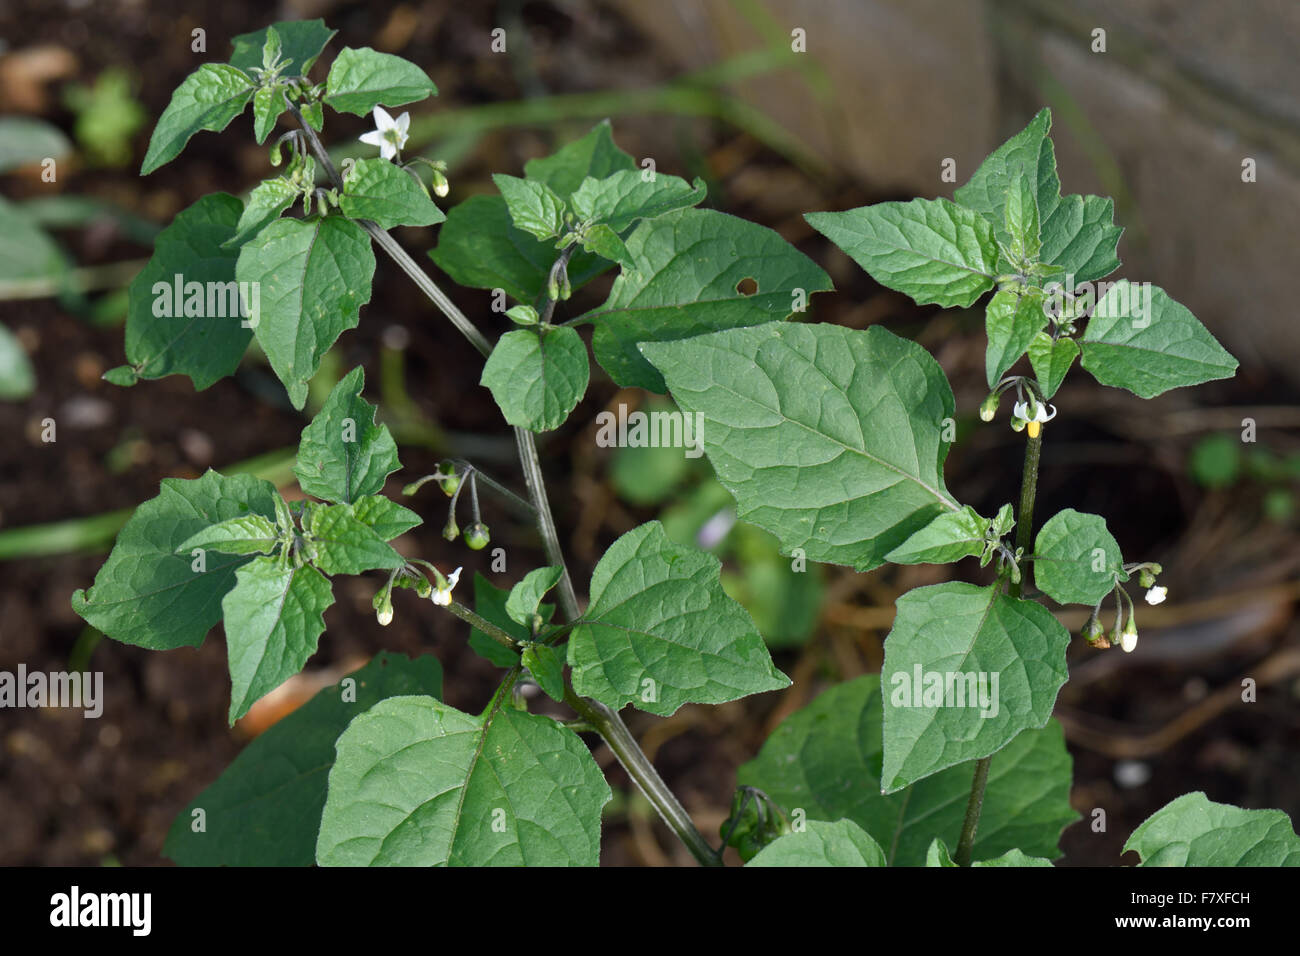 Black Nightshade, Solanum nigrum, flowering plant of annual arable weed with small white flowers and unripe green berries, Berkshire, England, August Stock Photo